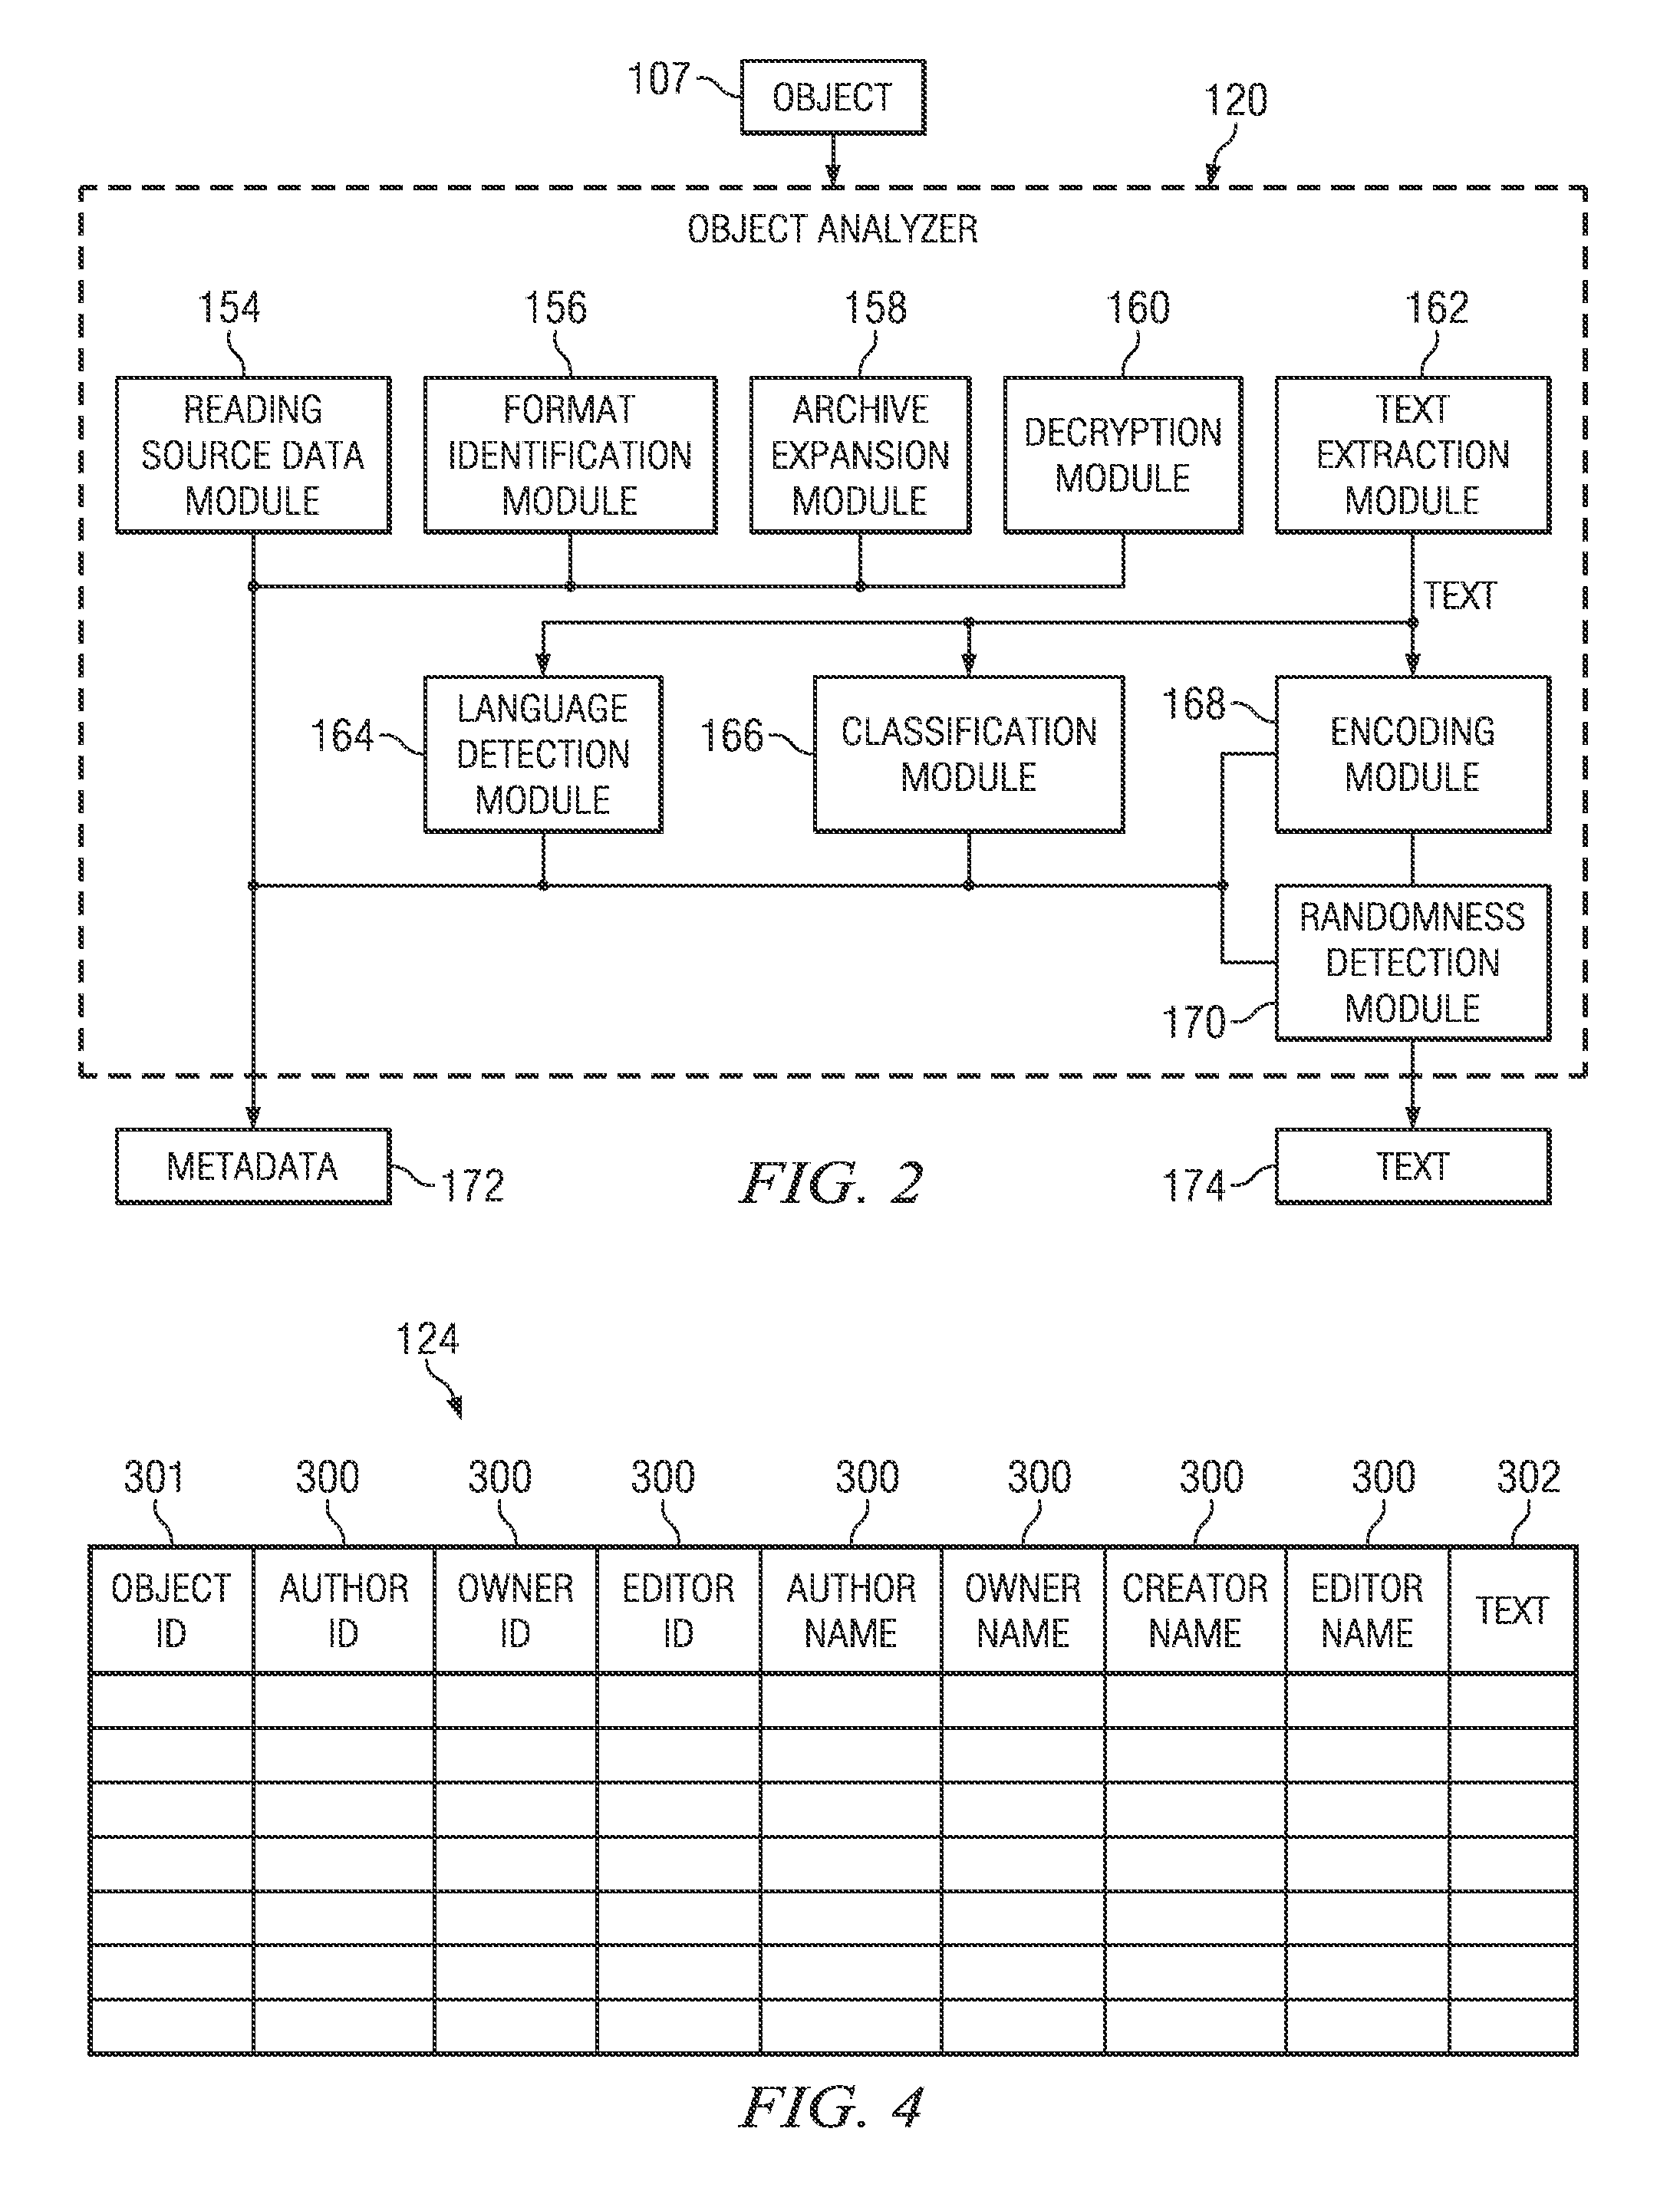 System and method of search indexes using key-value attributes to searchable metadata